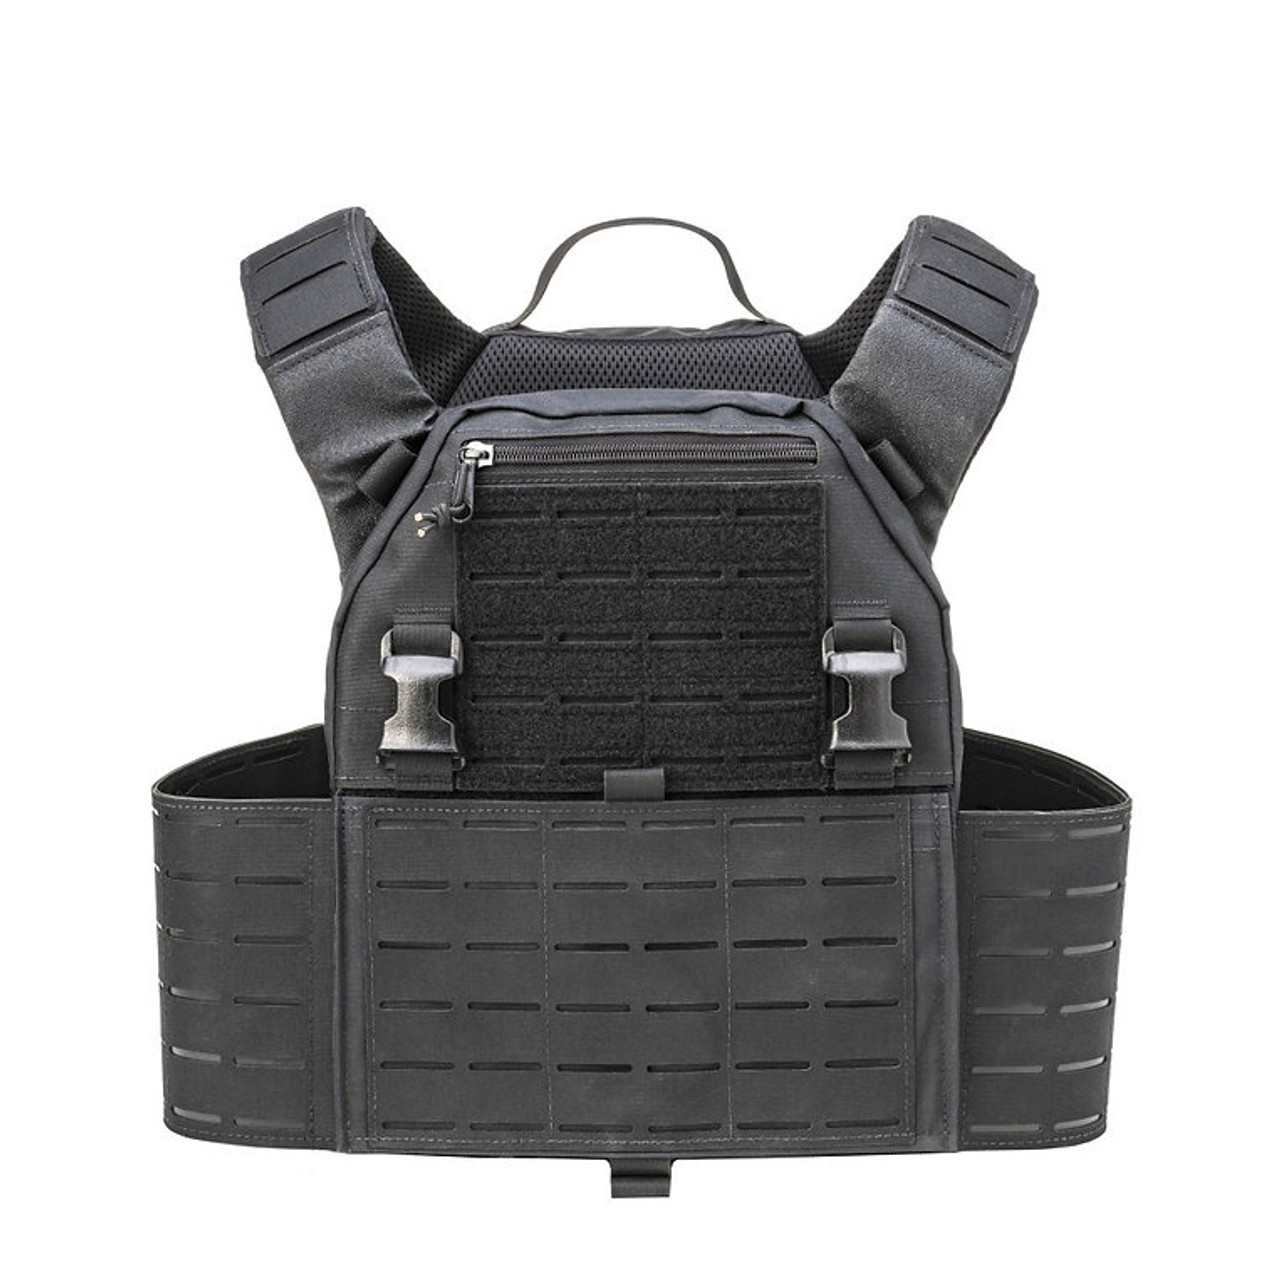 Tac Shield RZR Molle Plate Carrier